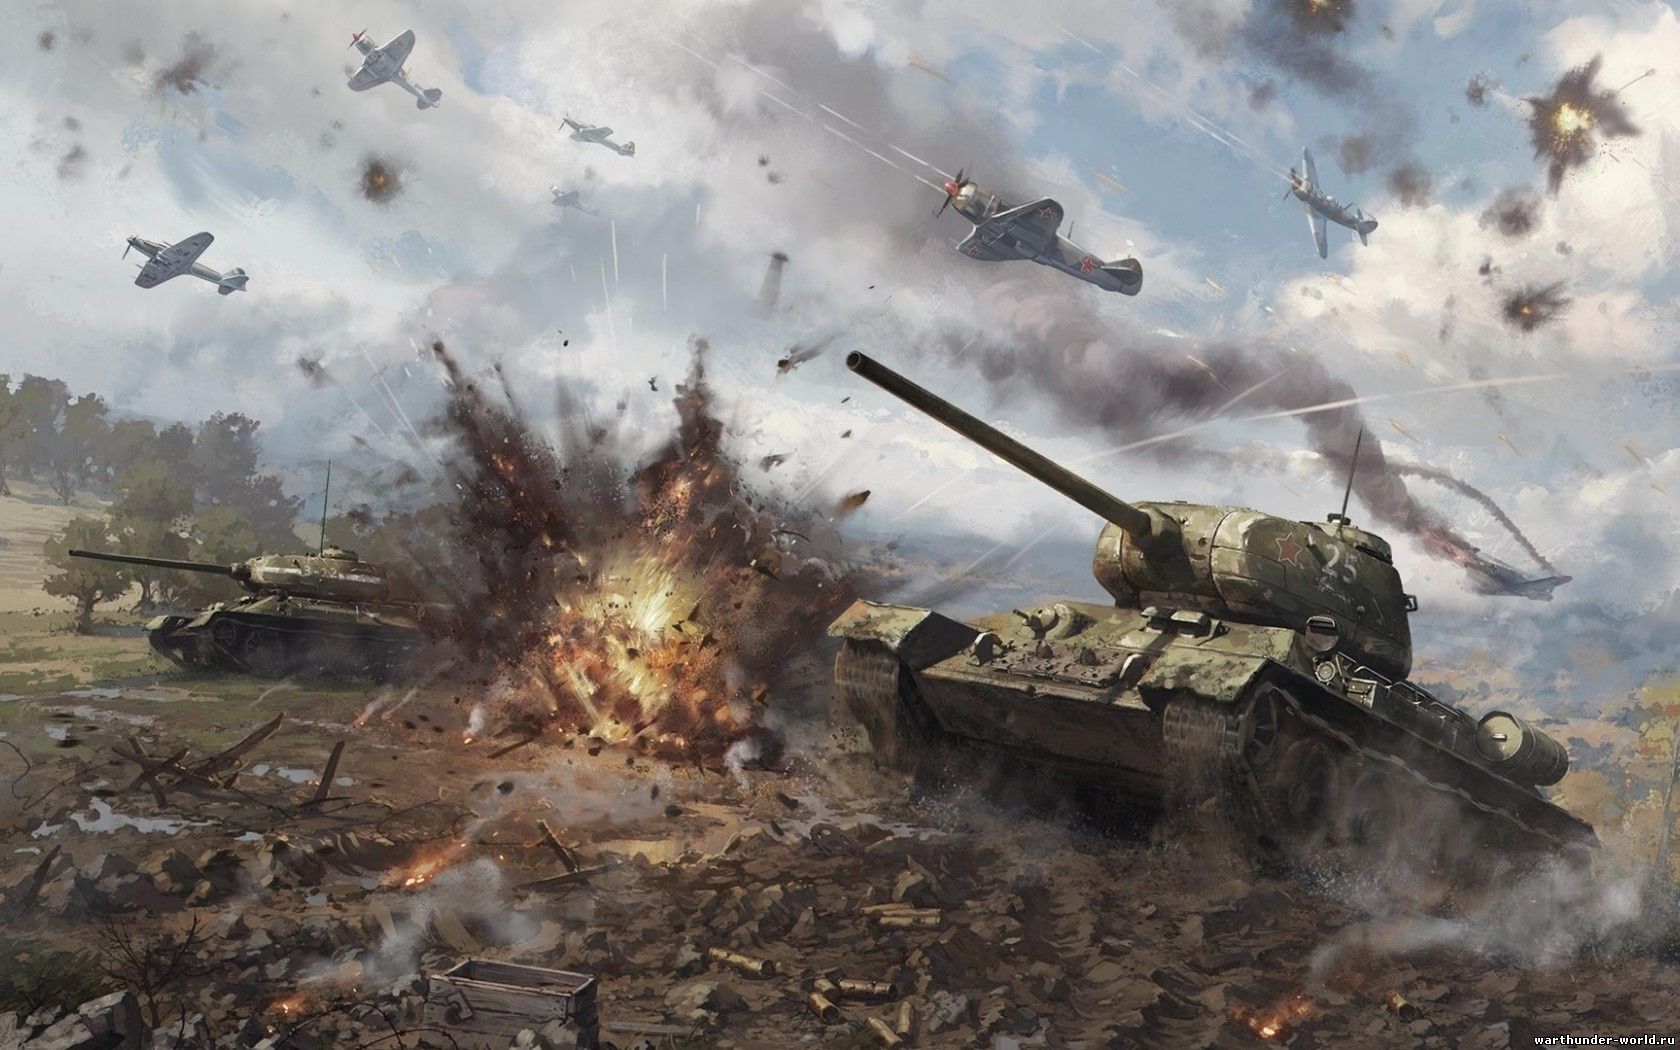 Gaijin and War Thunder are trademarks and / or registered trademarks of Gaijin Entertainment or its licensors, all other logos are trademarks of their respective owners